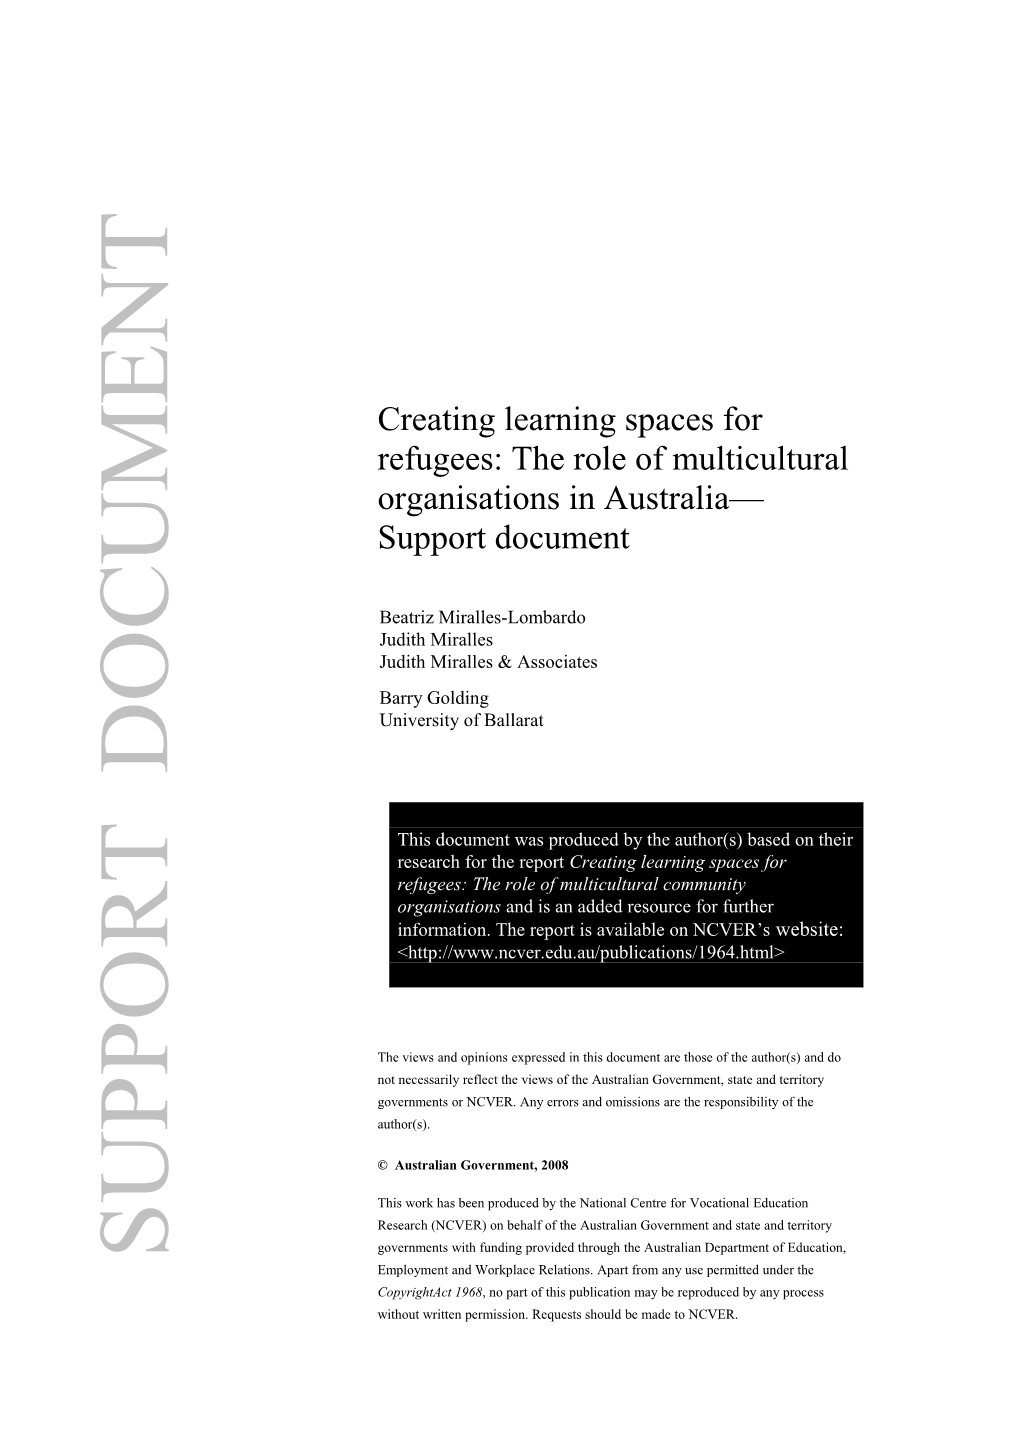 Creating Learning Spaces for Refugees: Support Document